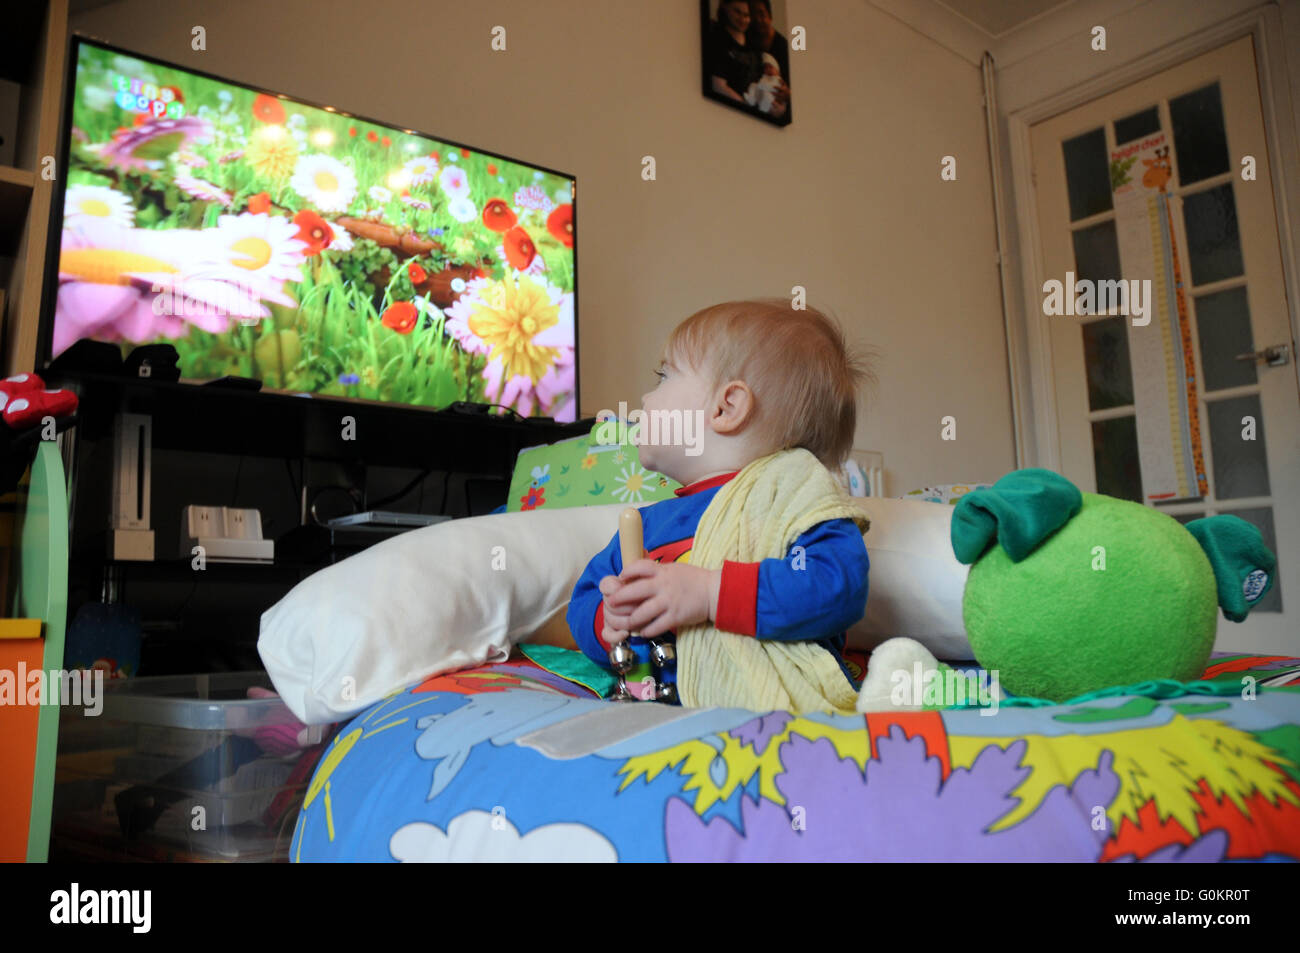 A Baby Watching A Television Stock Photo Alamy